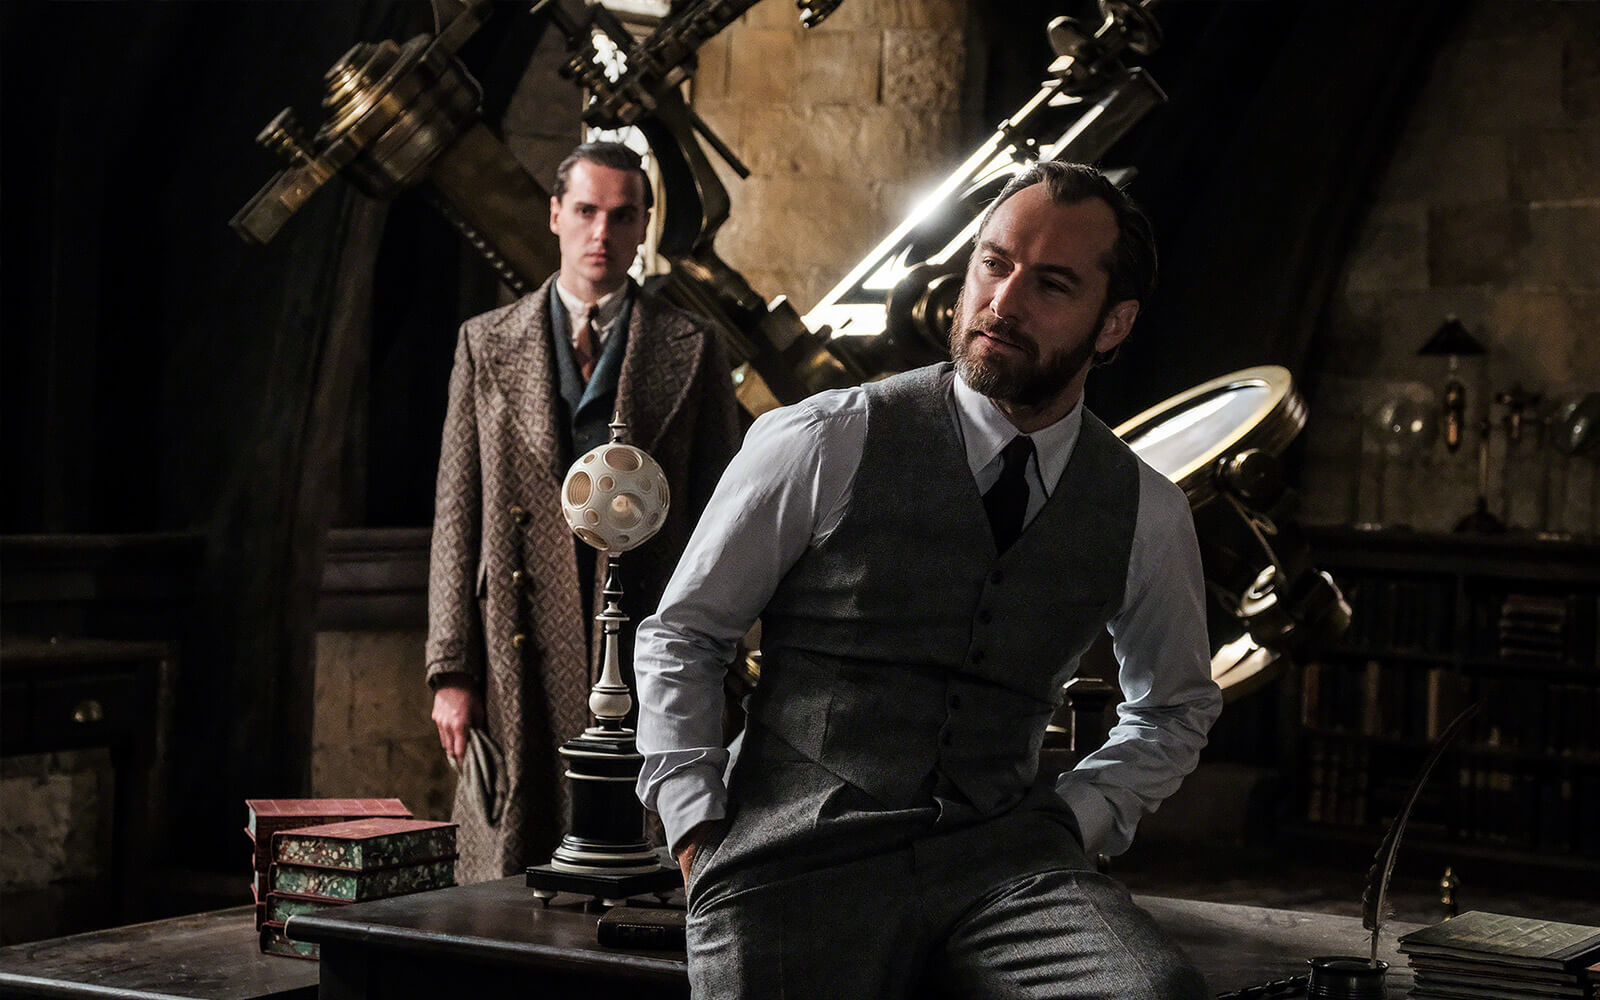 Jude Law as Albus Dumbledore in FANTASTIC BEASTS: THE CRIMES OF GRINDELWALD (2018)